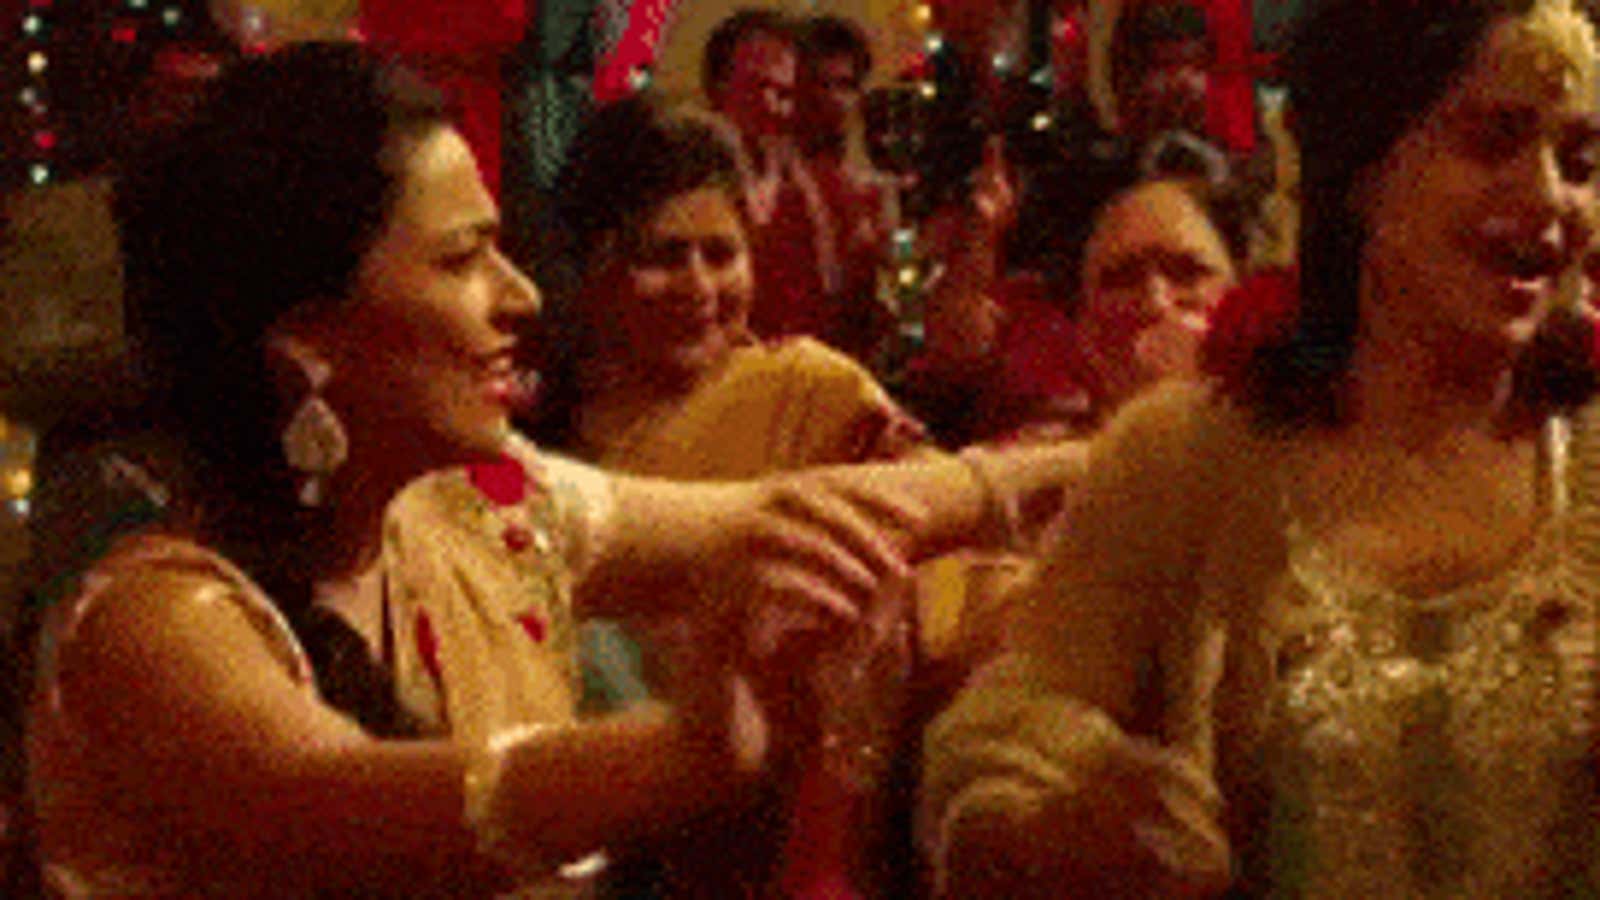 Kangana Ranaut dances in the movie Queen to the song London Thumakda.